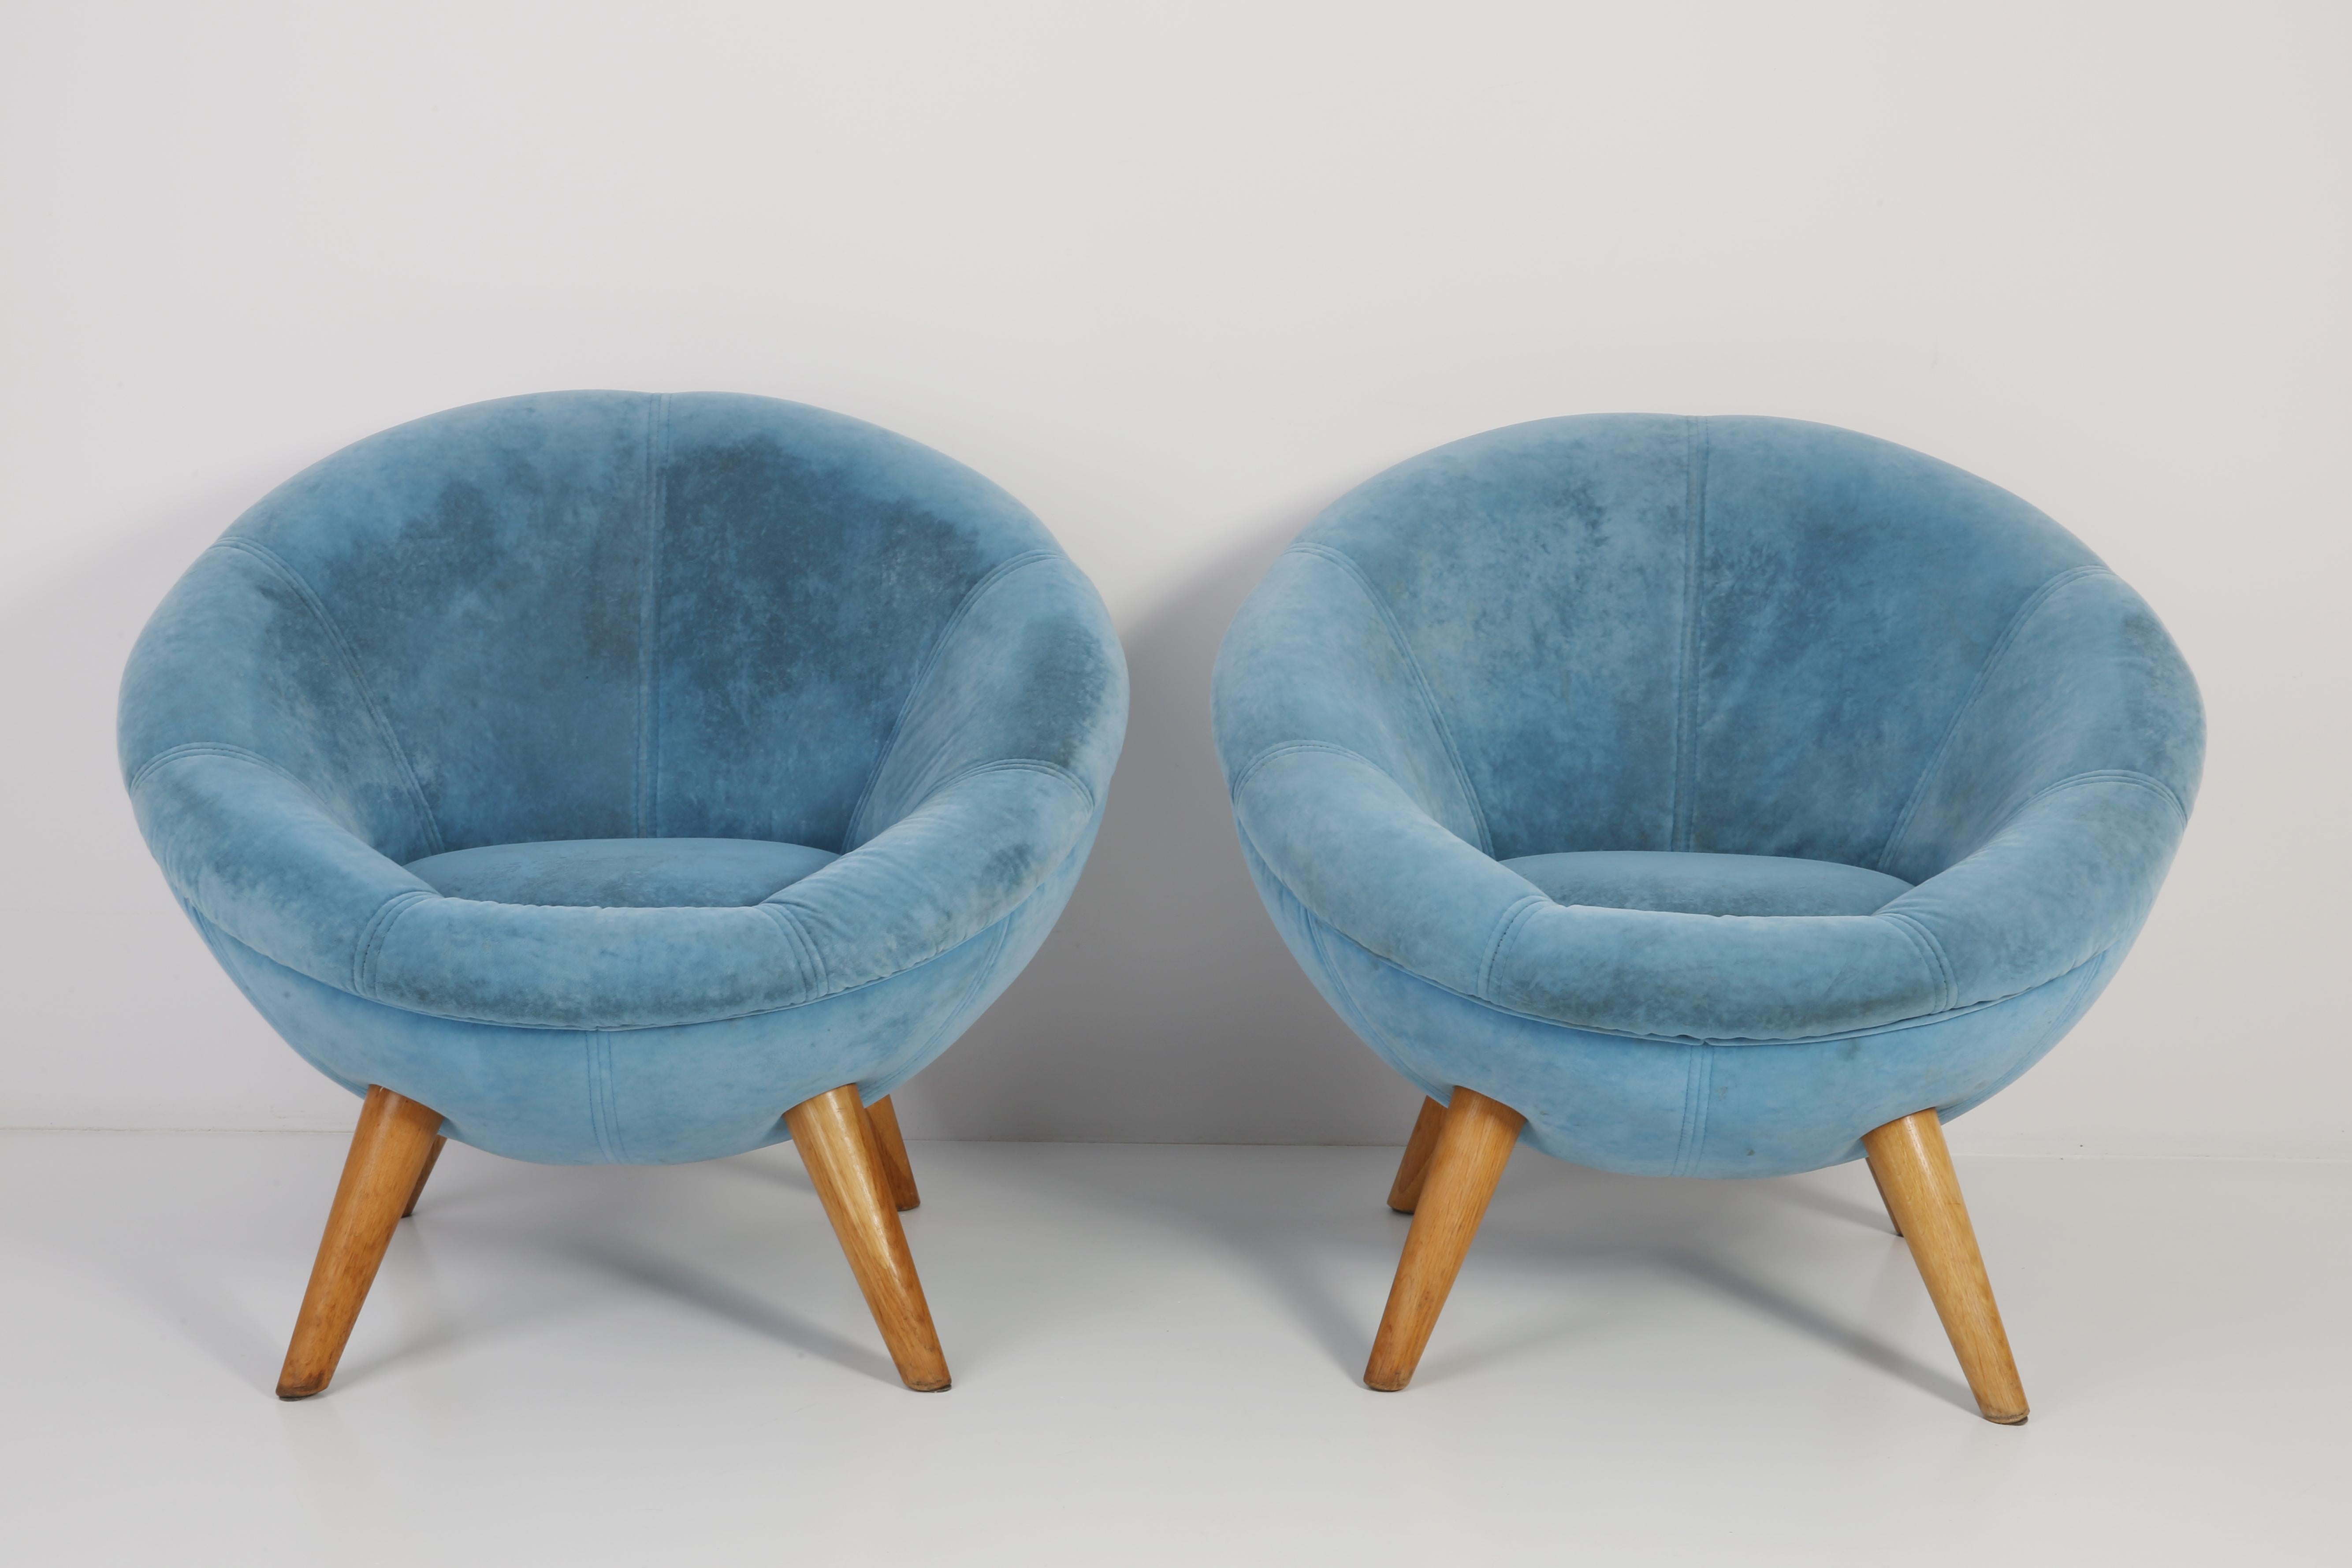 German armchairs produced in the 1960s in Berlin. Very unique old vintage model. Only one set is available.
The armchairs are in very good original vintage condition. The upholstery is made of high quality fabric - blue alcantara velvet